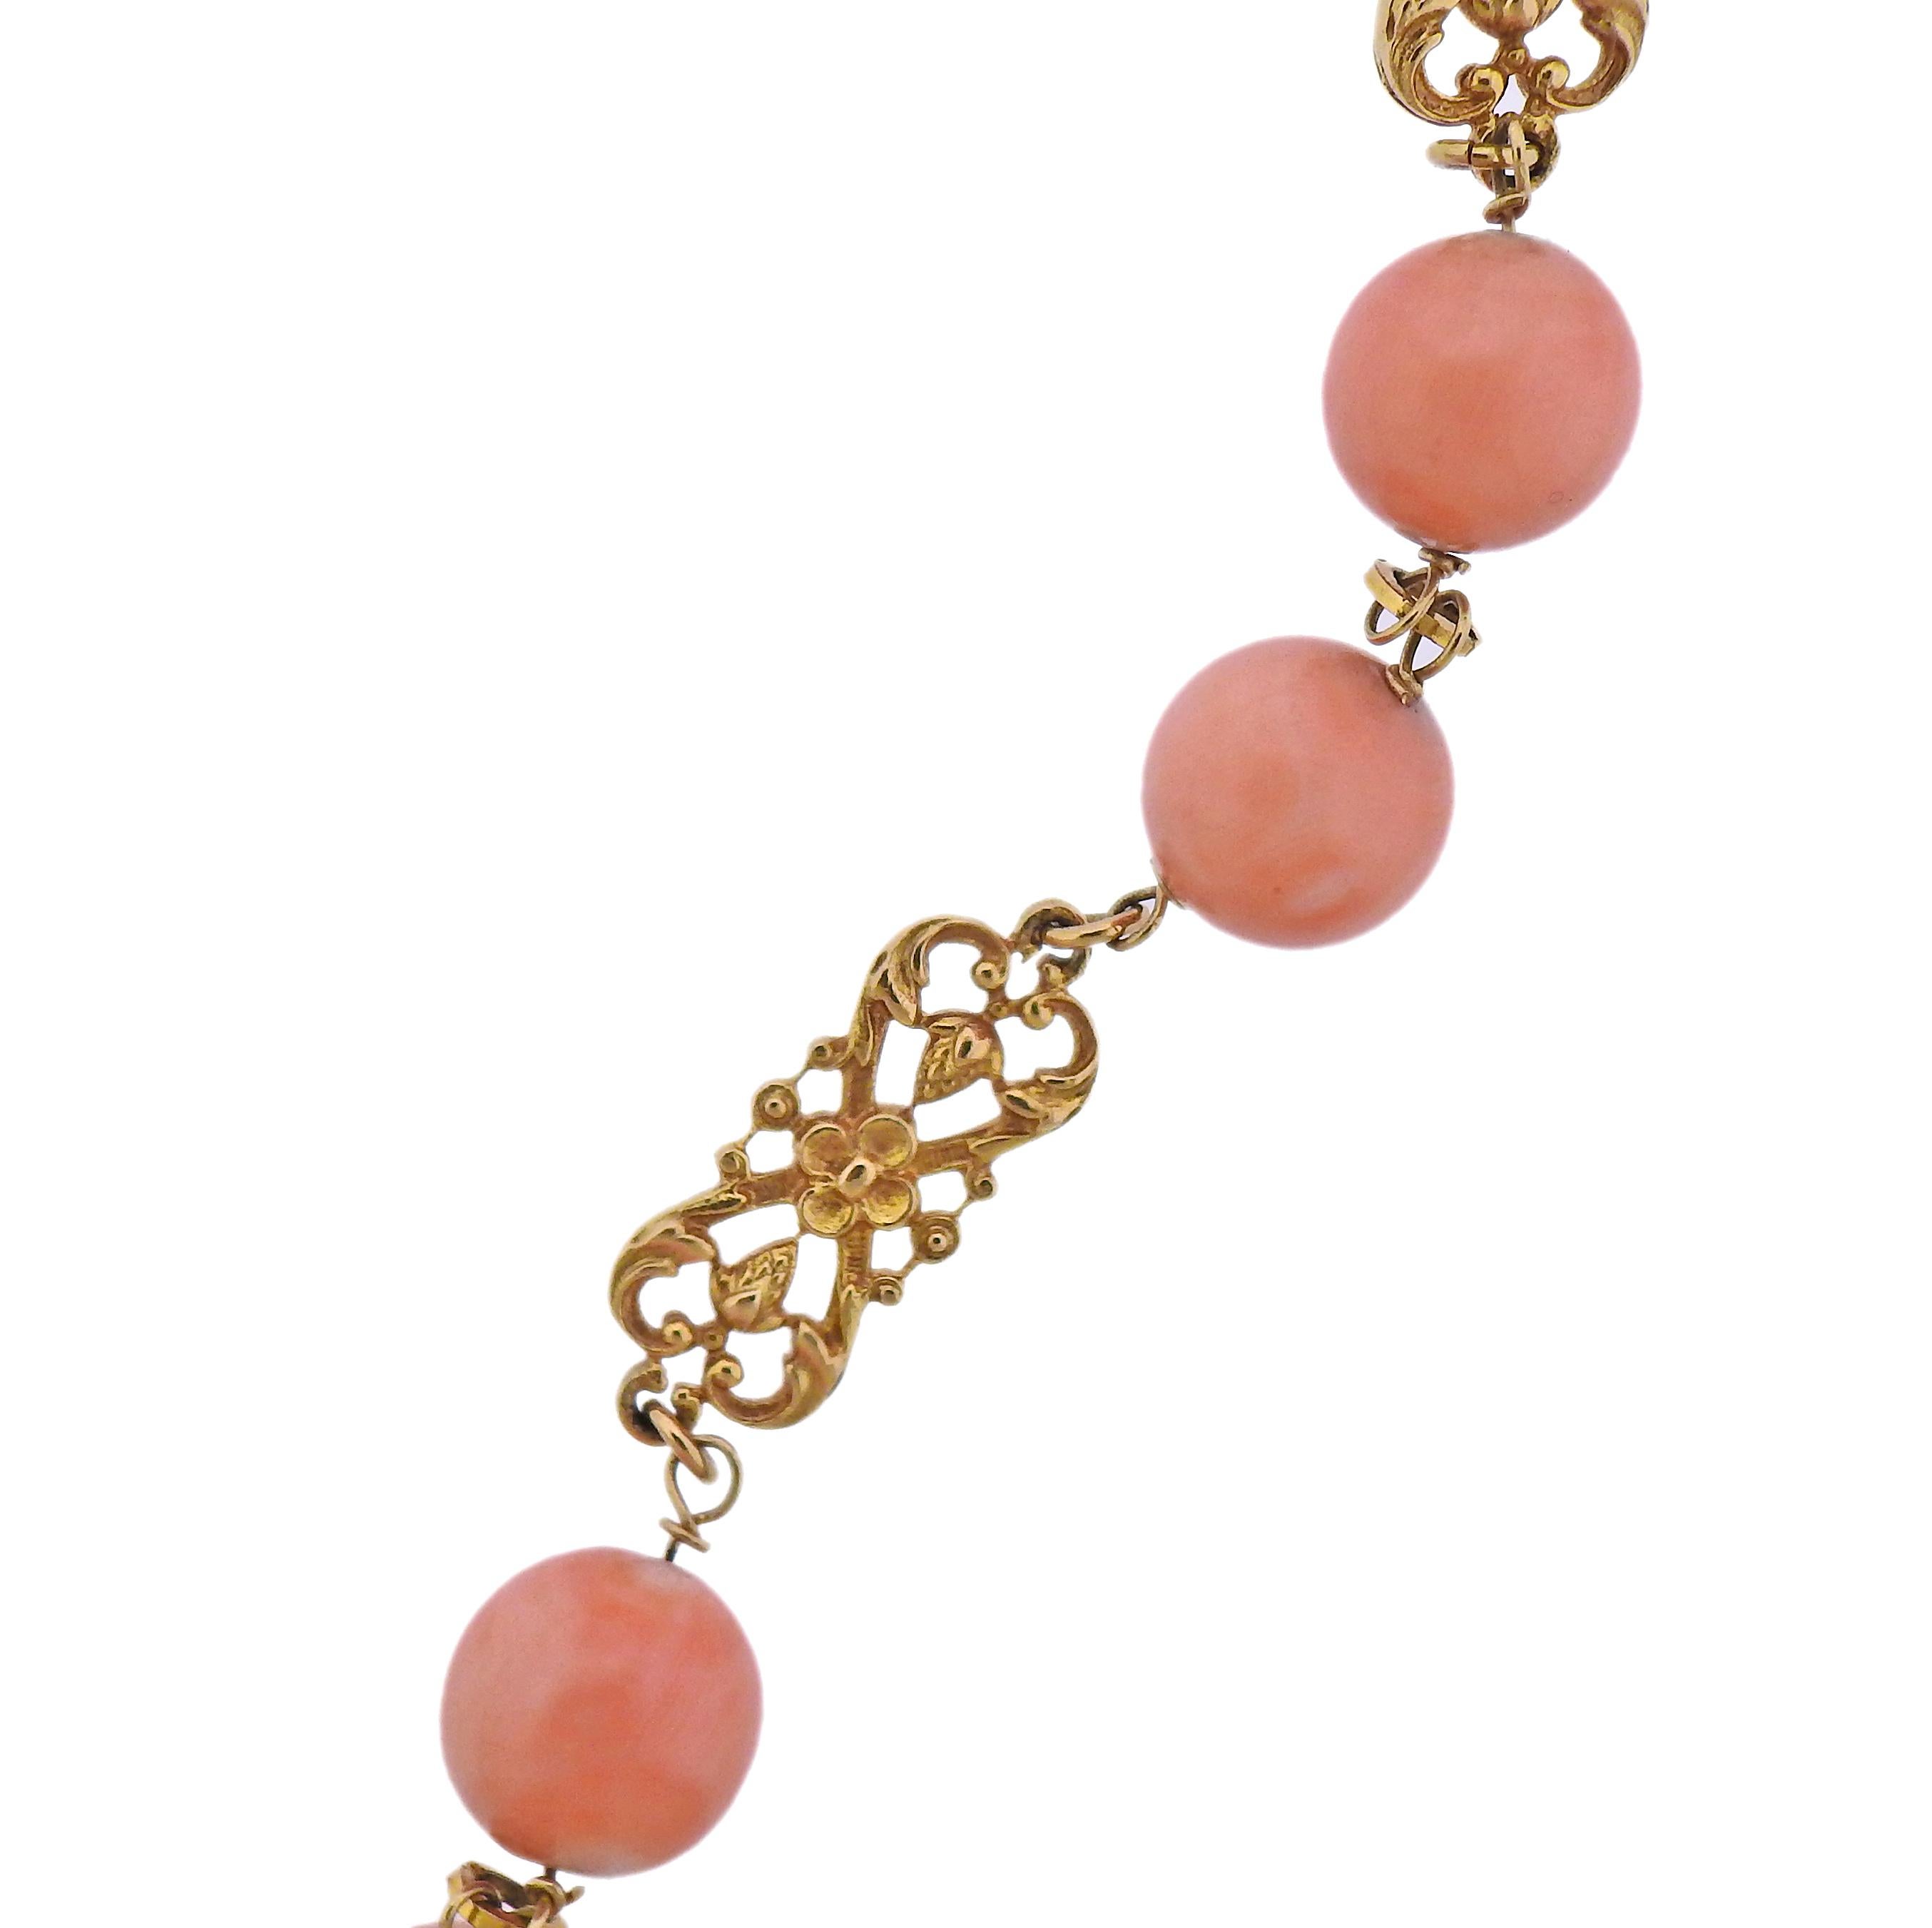 14k gold long necklace with coral beads, measuring from 9.7mm to 15.4mm. Necklace is 33